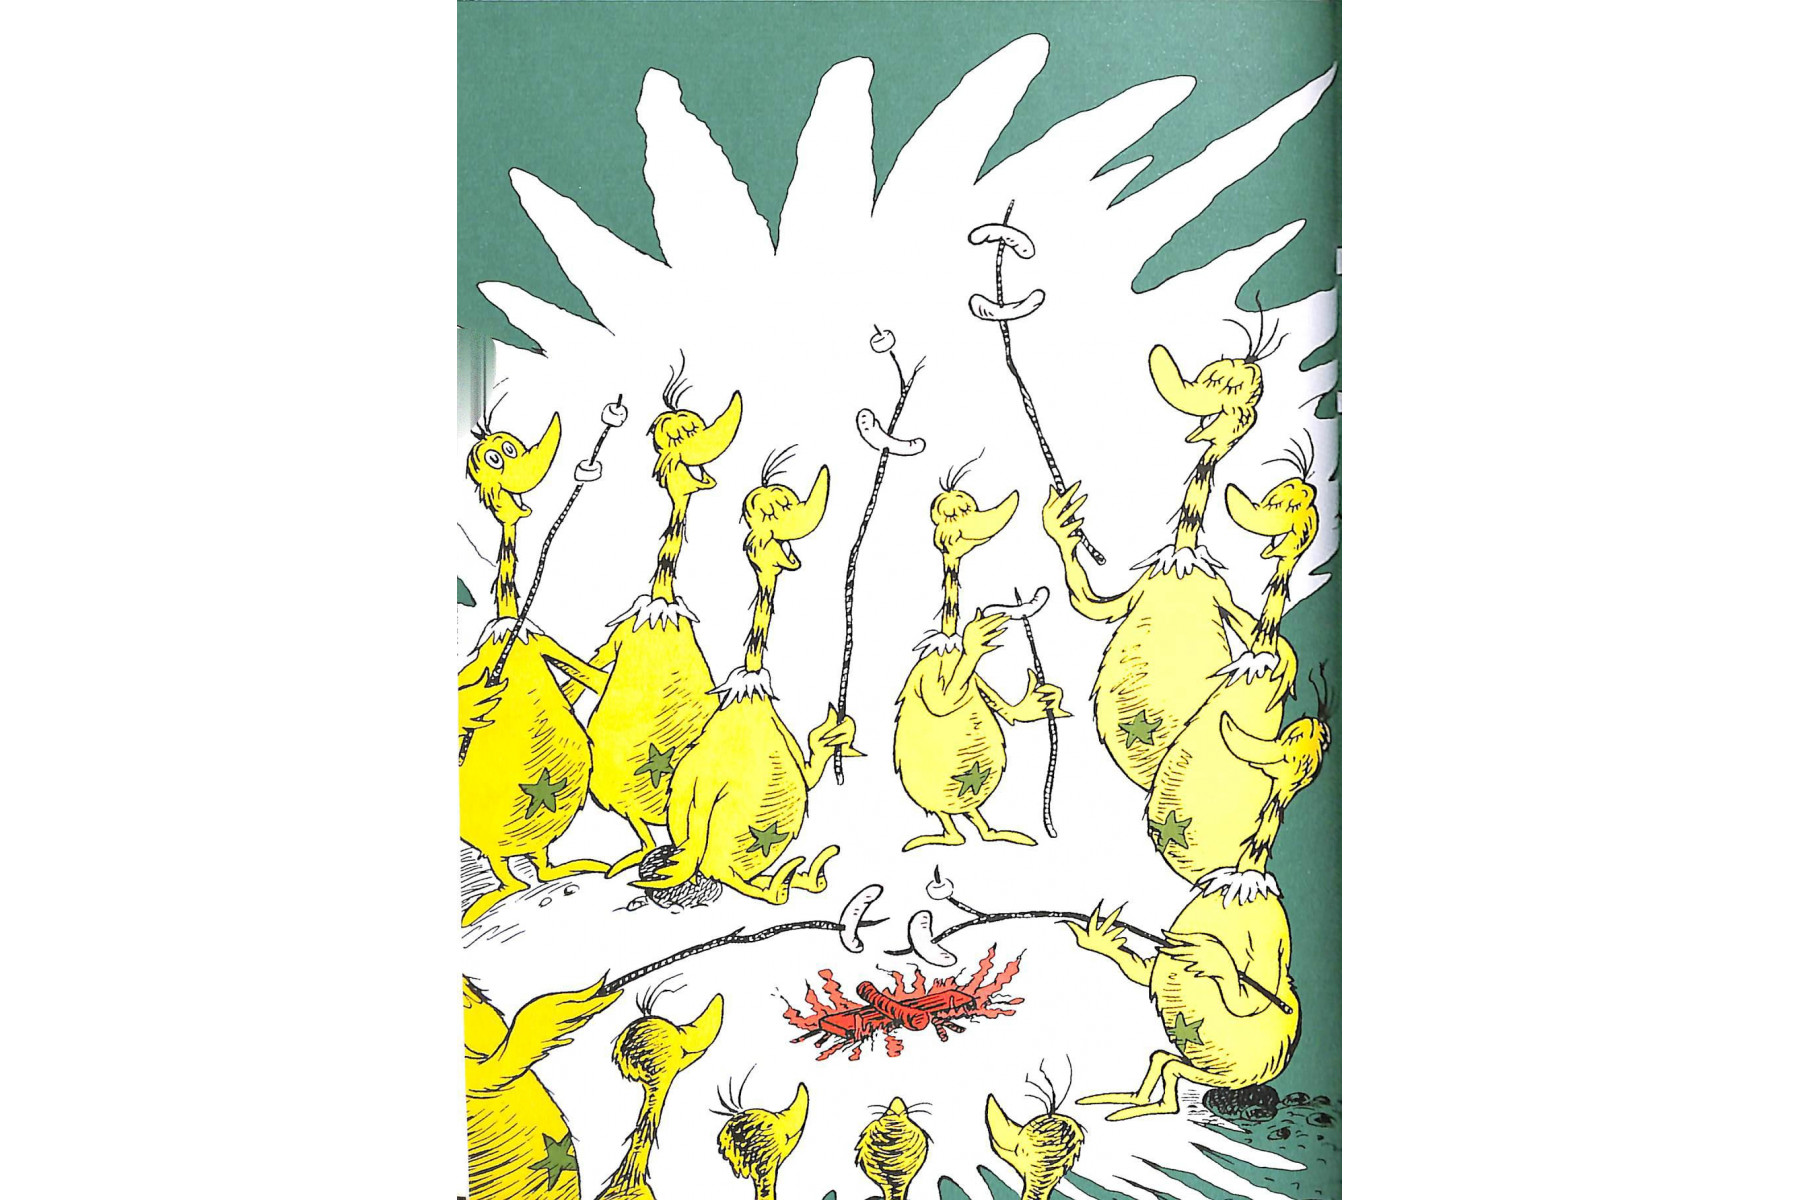 The Sneetches and Other Stories: Yellow Back Book